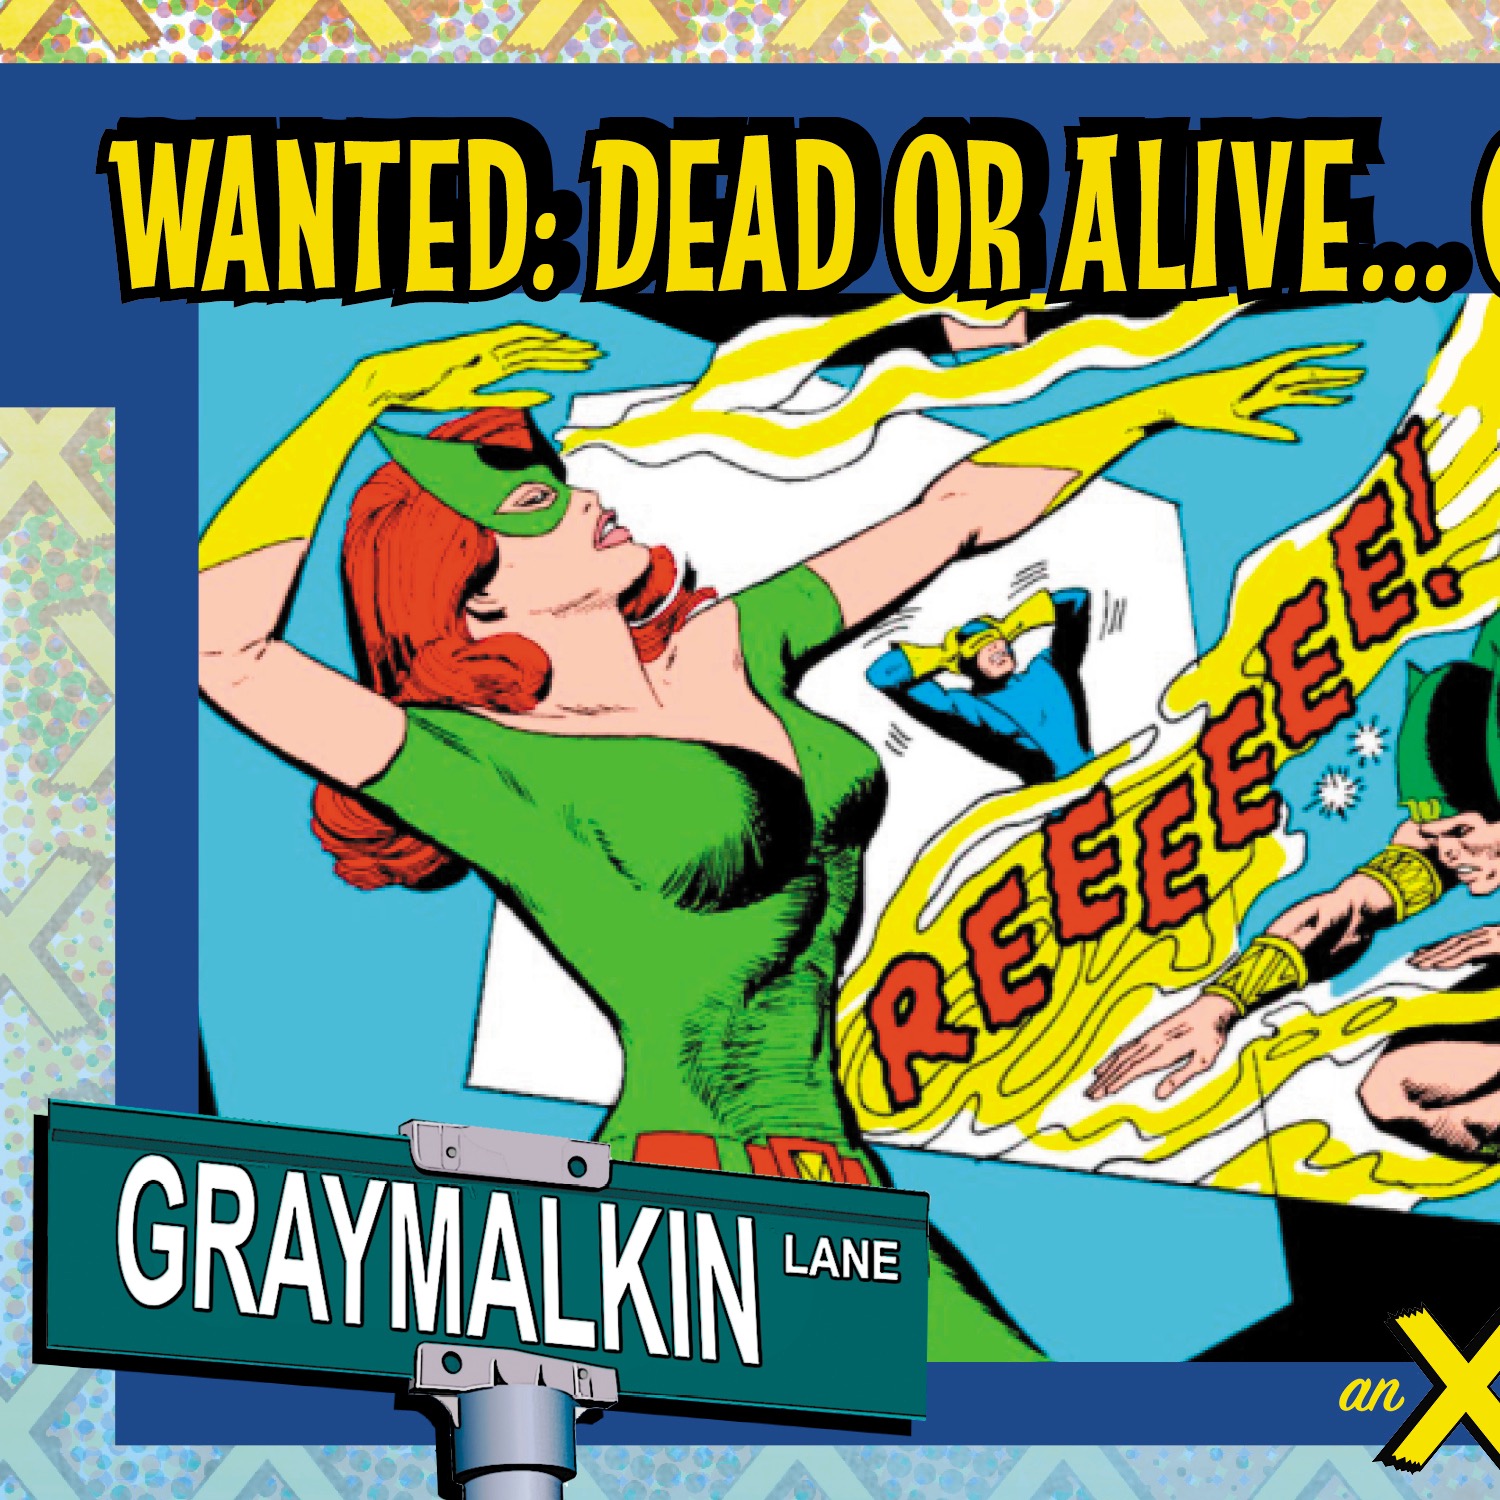 X-Men 54: Wanted Dead or Alive... Cyclops! Featuring Eliot R. Brown! With Jeff Christiansen and Gabriel Shechter!